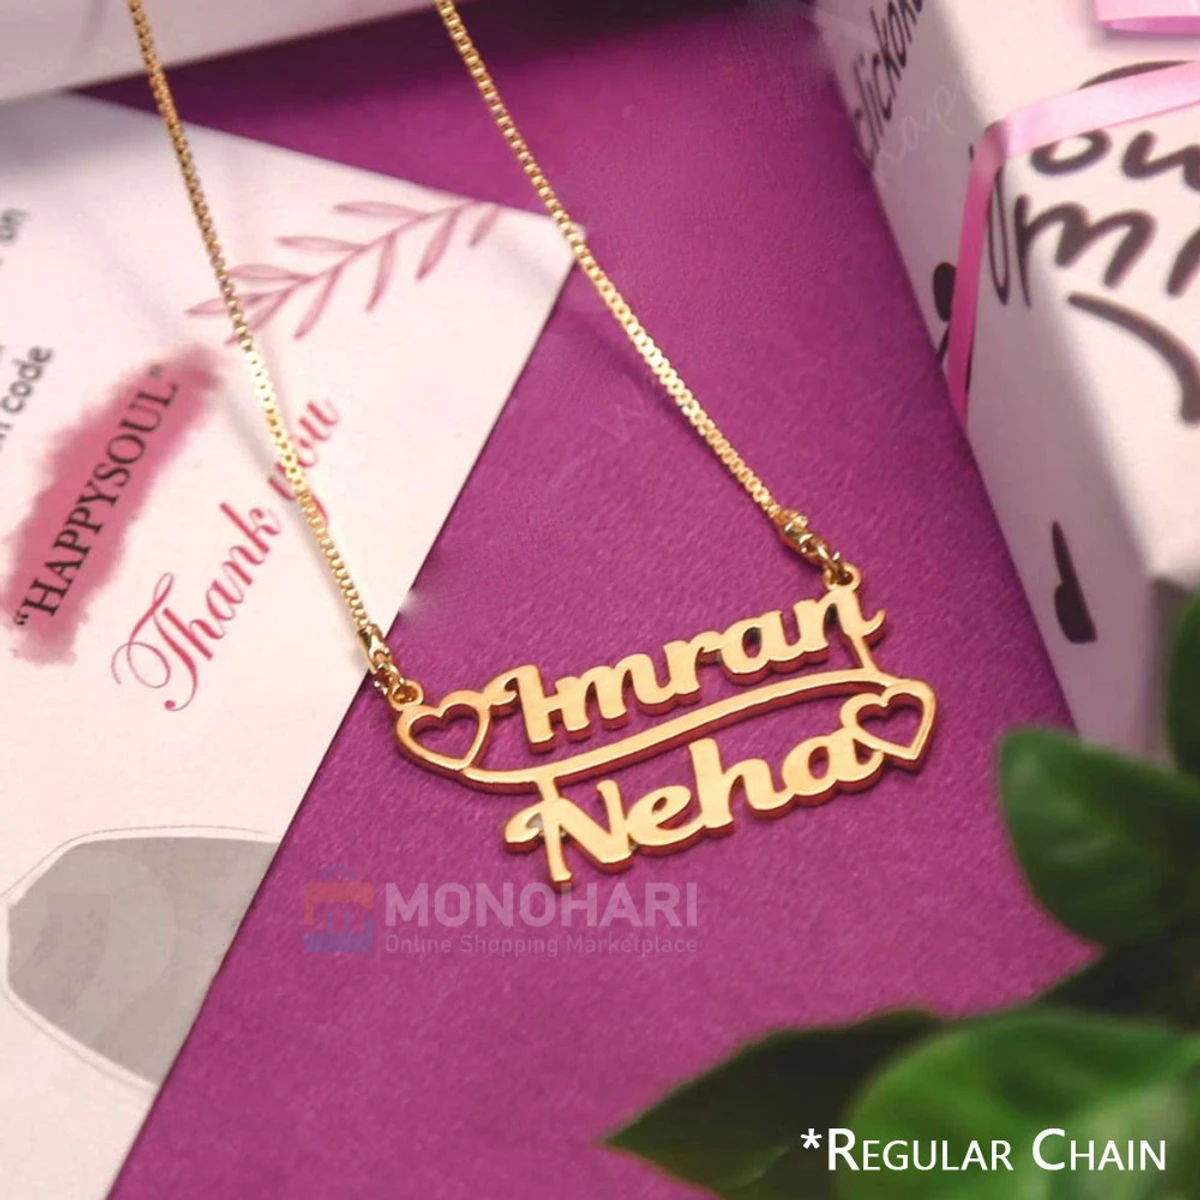 Couple Name Necklace (Imran & Neha) Both Side Heart Shape 22K Gold Plated Customized Necklace